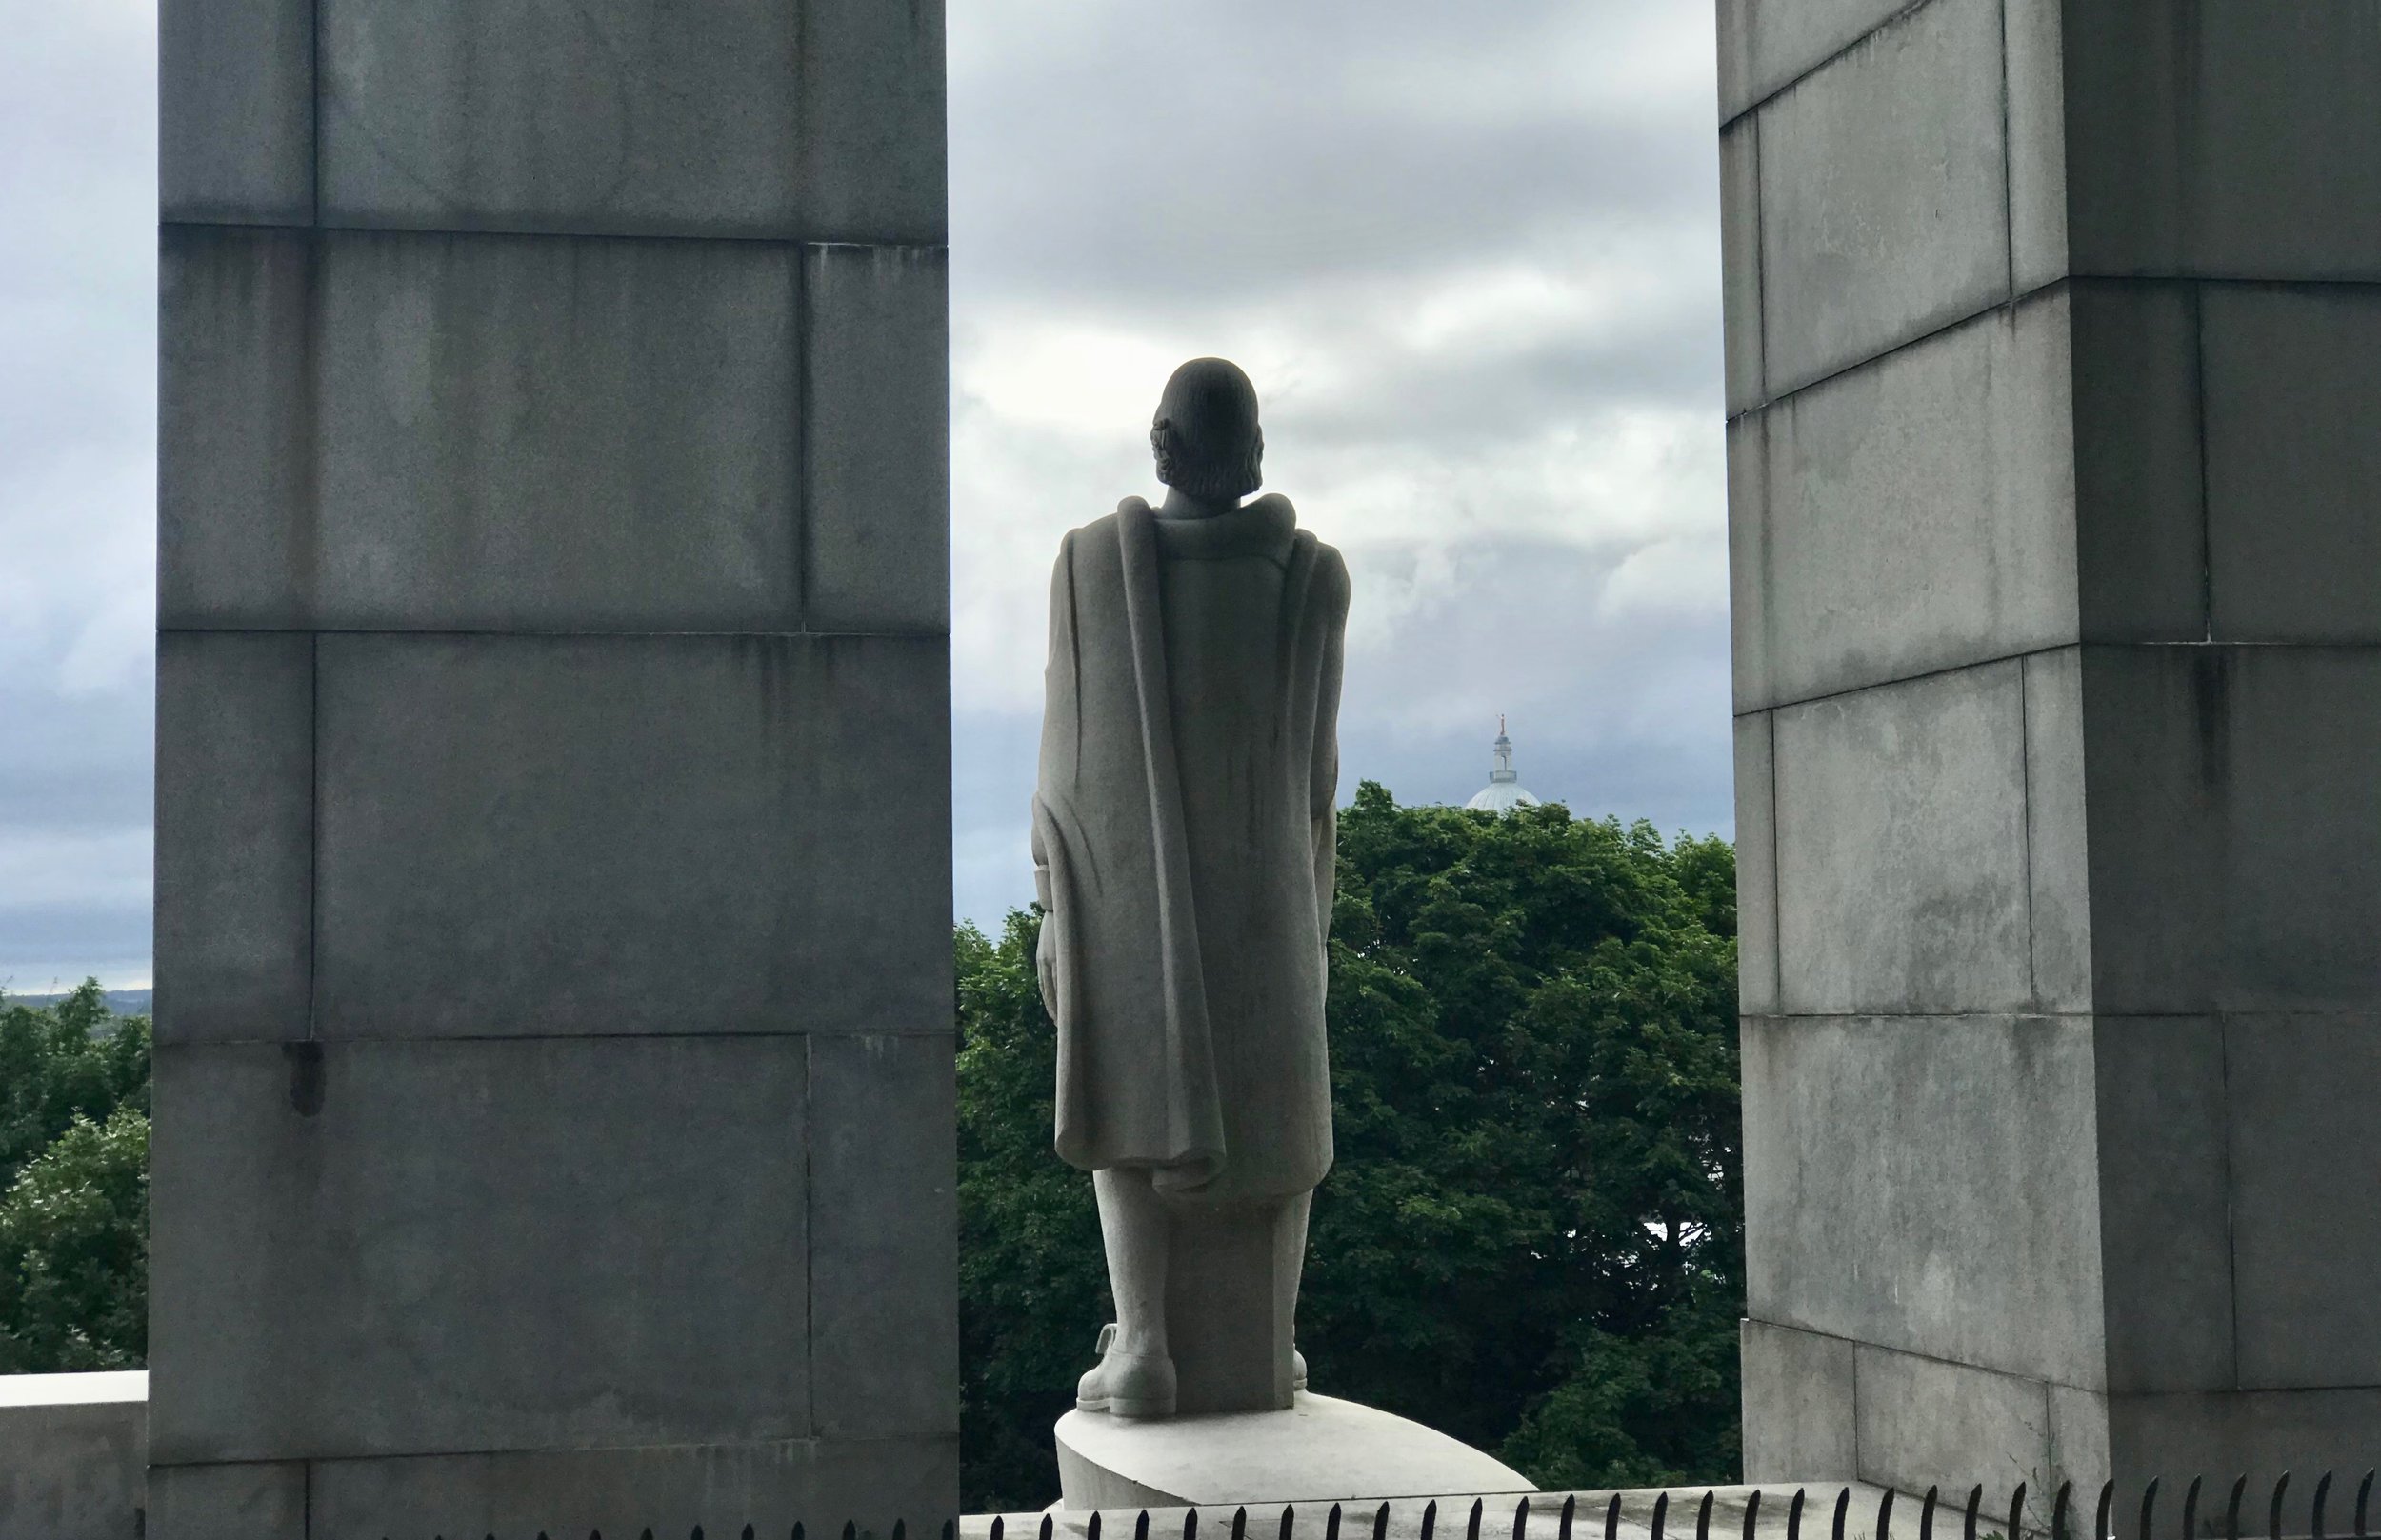  A statue representing Roger Williams (there is no historical description of his appearance) looks out over Providence, R.I., the city he founded as a refuge from religious persecution.      